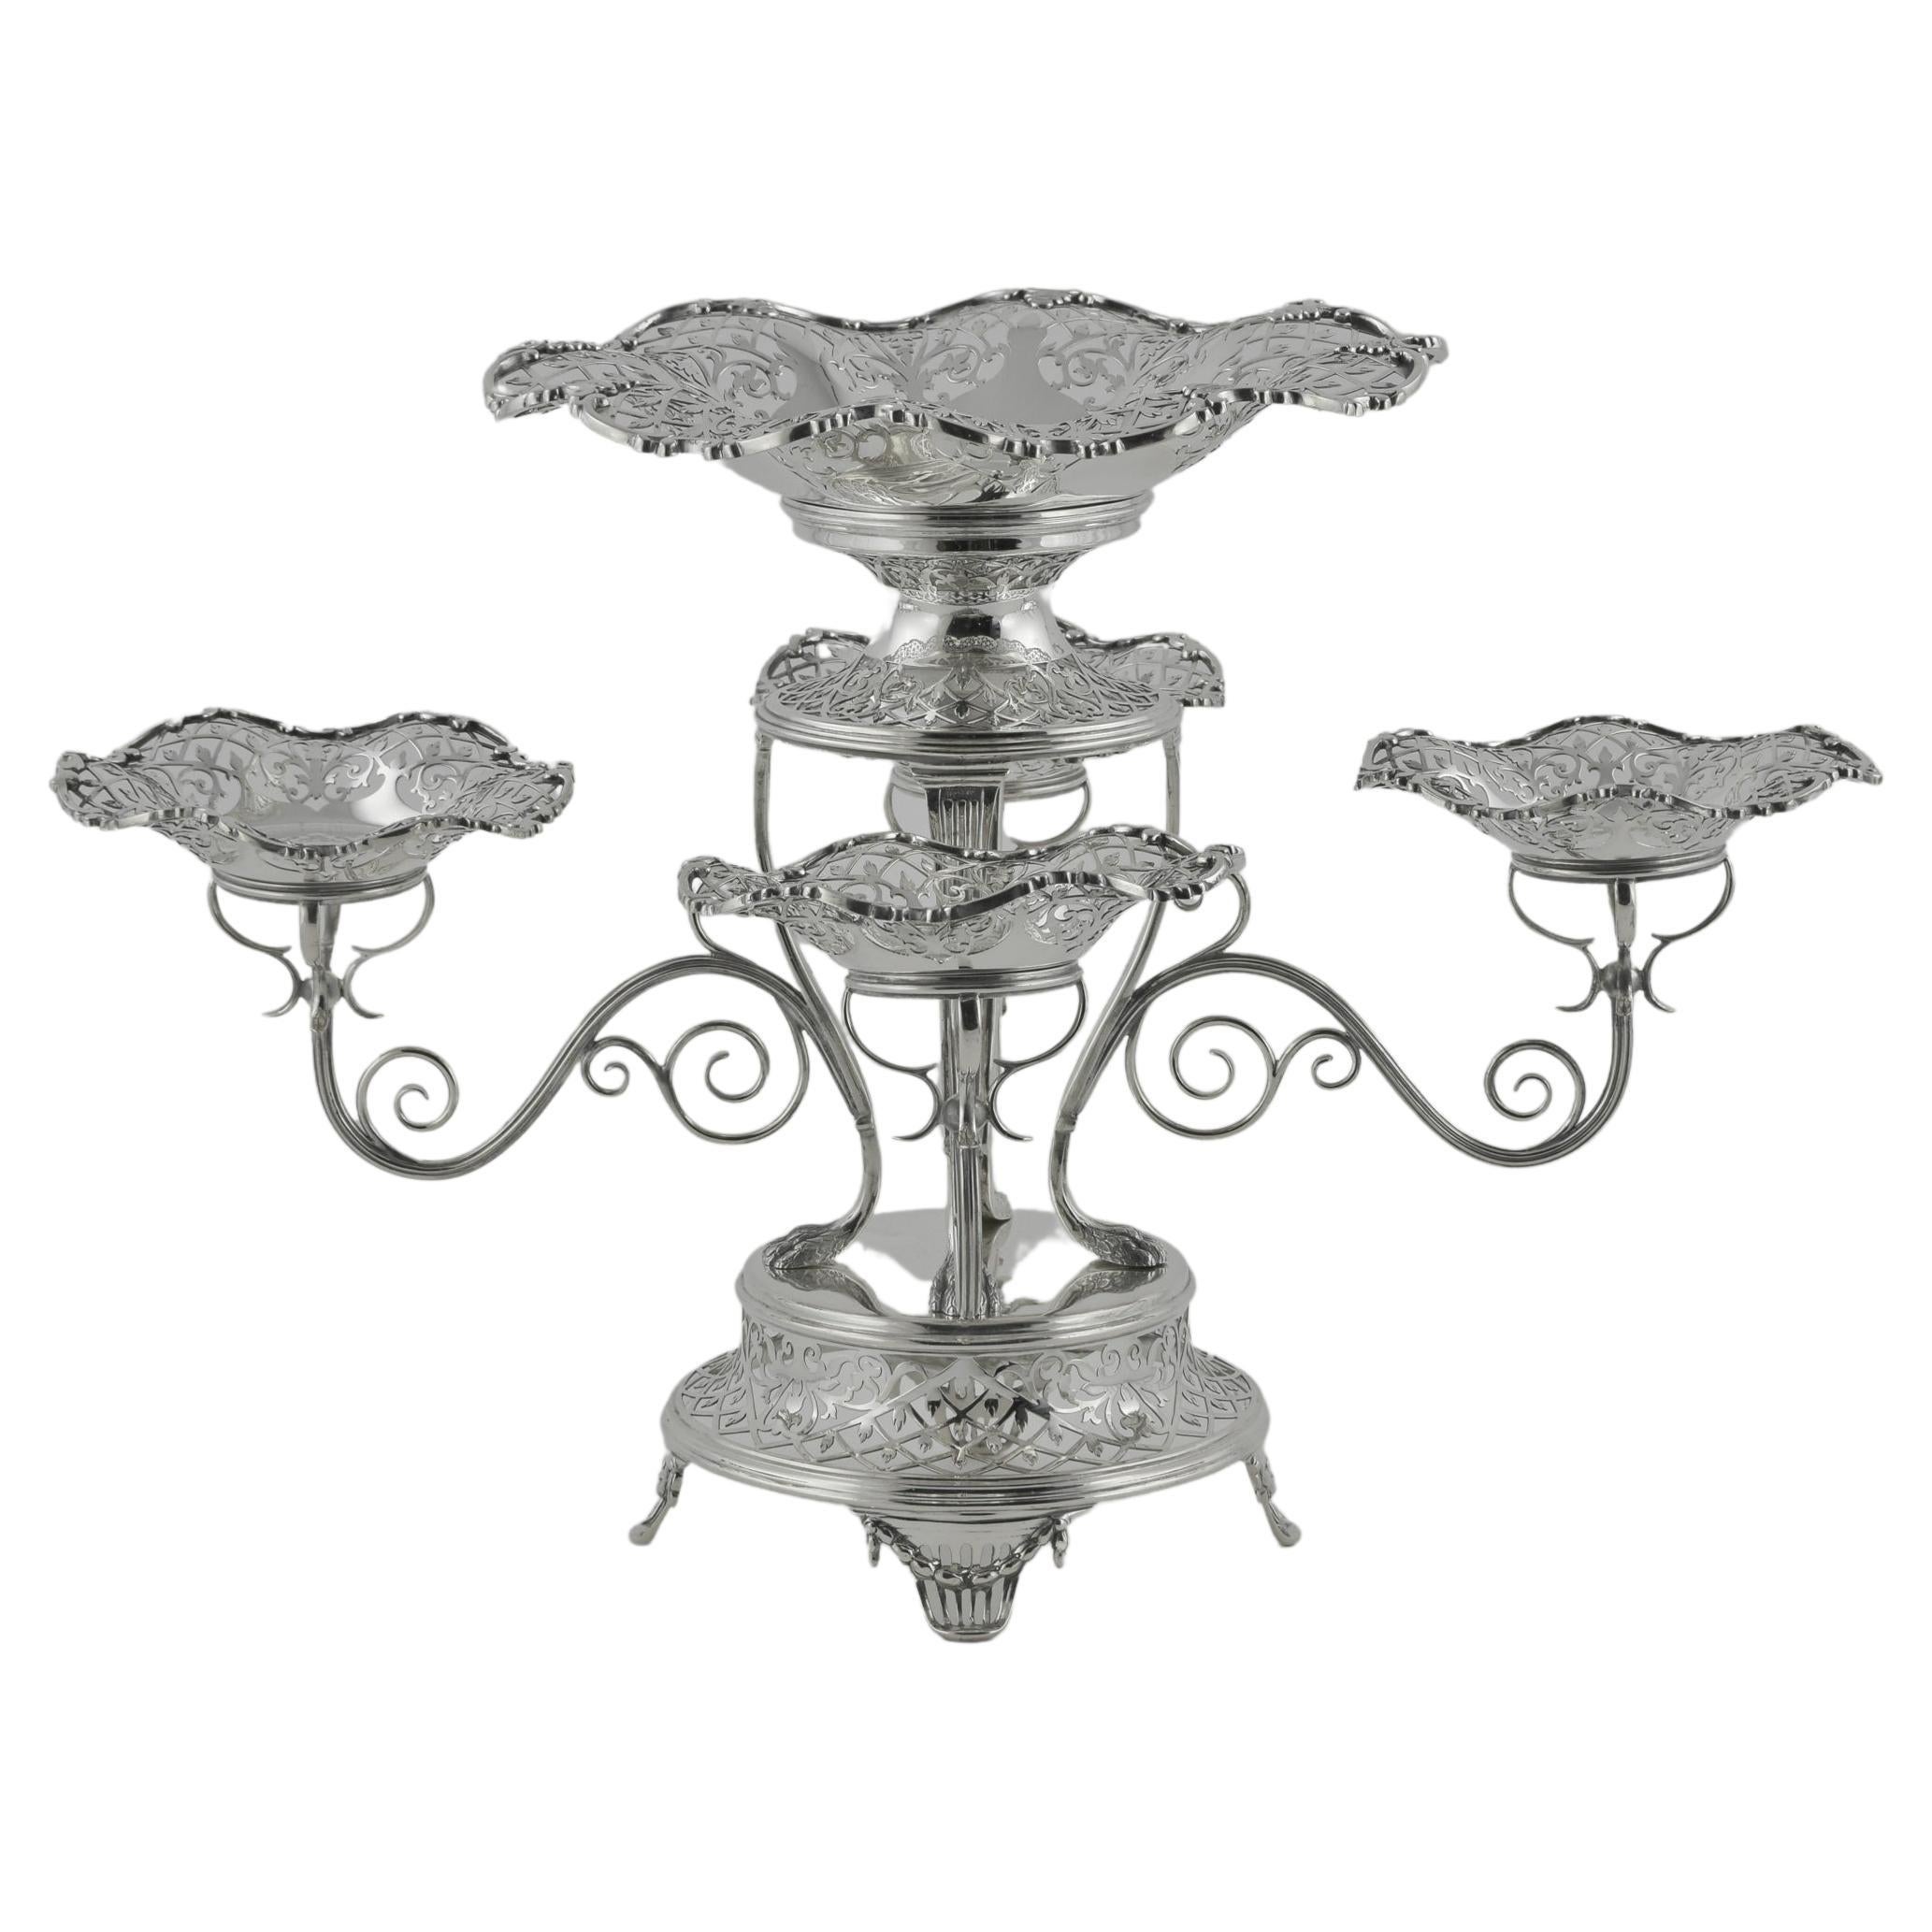 Early 20th Century 5 Dish Silver Plated Epergne